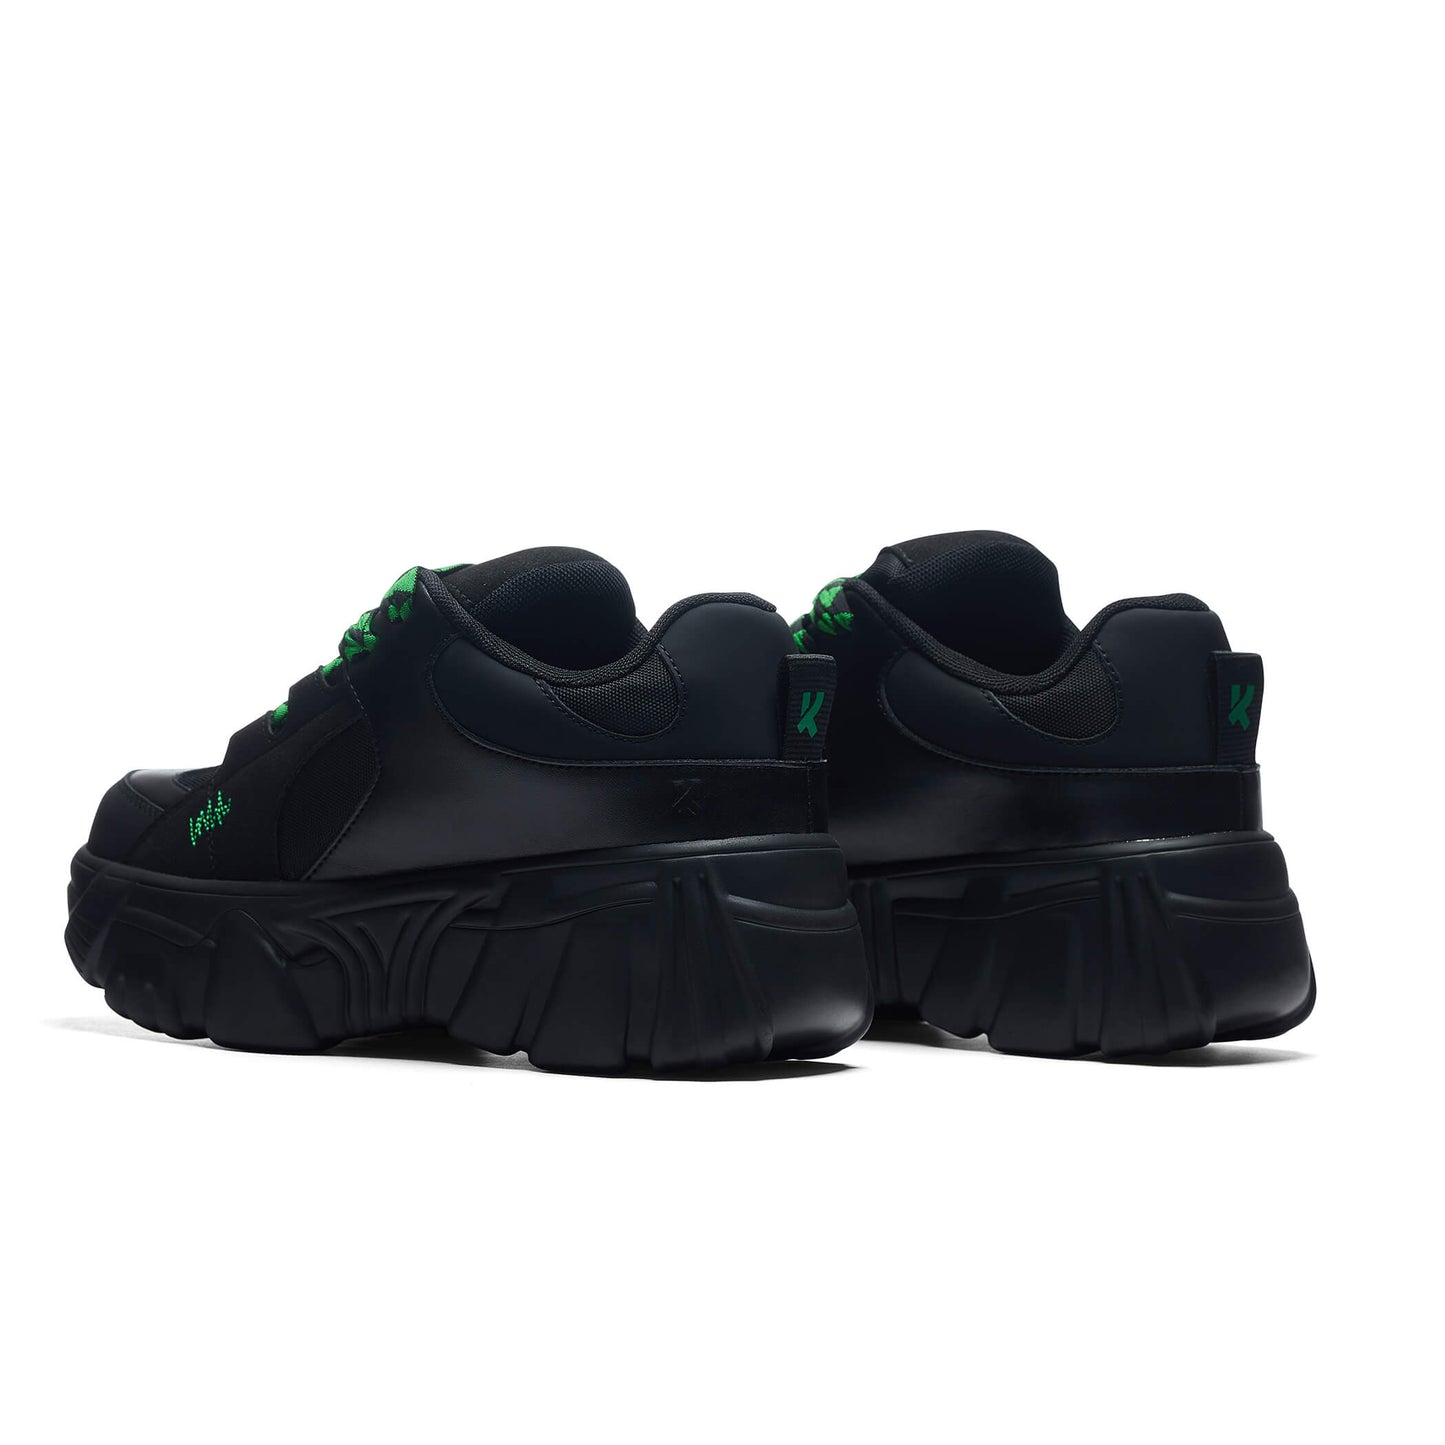 Ricta Flip Chunky Trainers - Green Lace - Trainers - KOI Footwear - Black - Back View